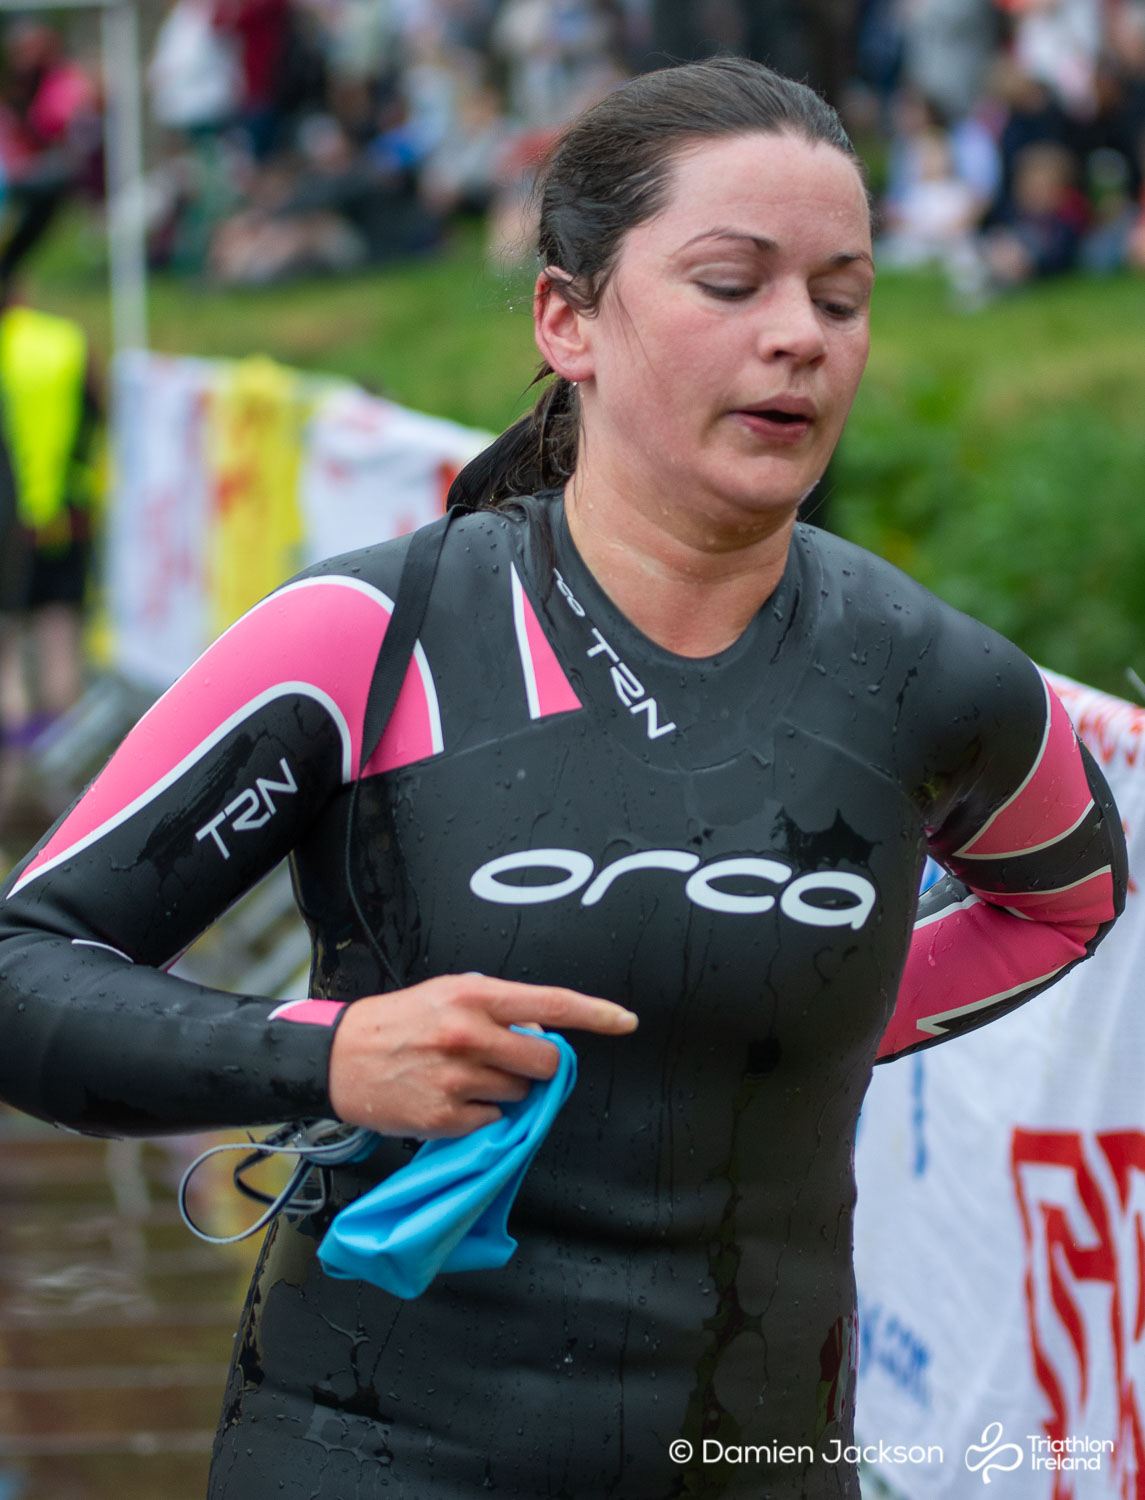 Athy_2018 (101 of 526) - TriAthy - XII Edition - 2nd June 2018